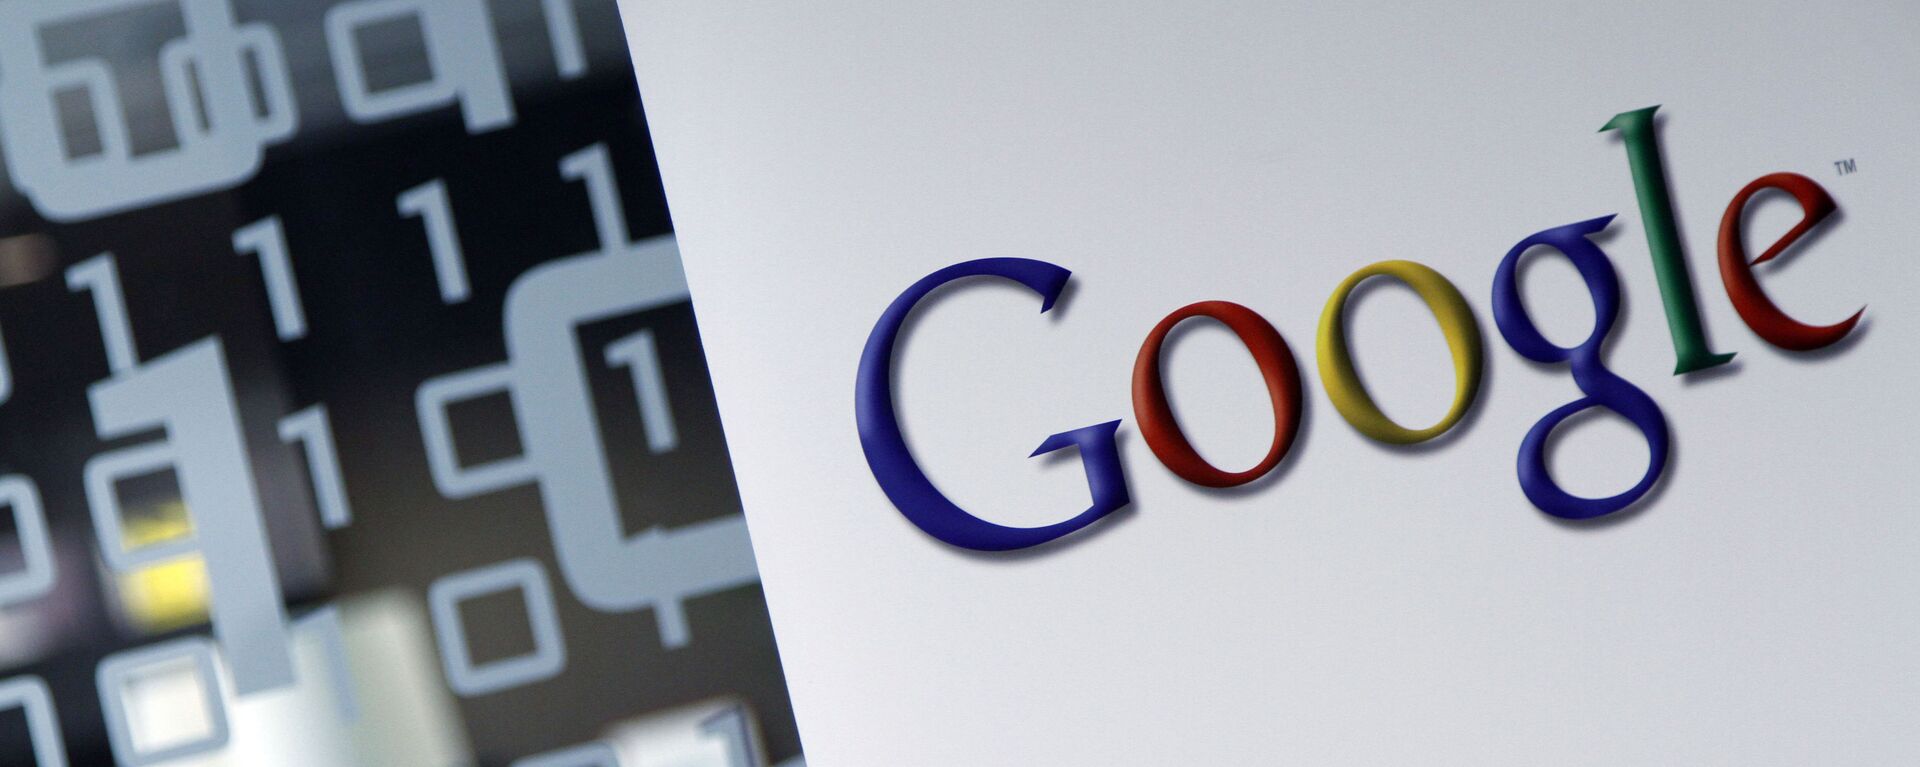 In this March 23, 2010, file photo, the Google logo is seen at the Google headquarters in Brussels. Germany’s finance minister on Wednesday welcomed an agreement requiring large companies in the European Union to reveal how much tax they paid in which country. - Sputnik International, 1920, 12.08.2022